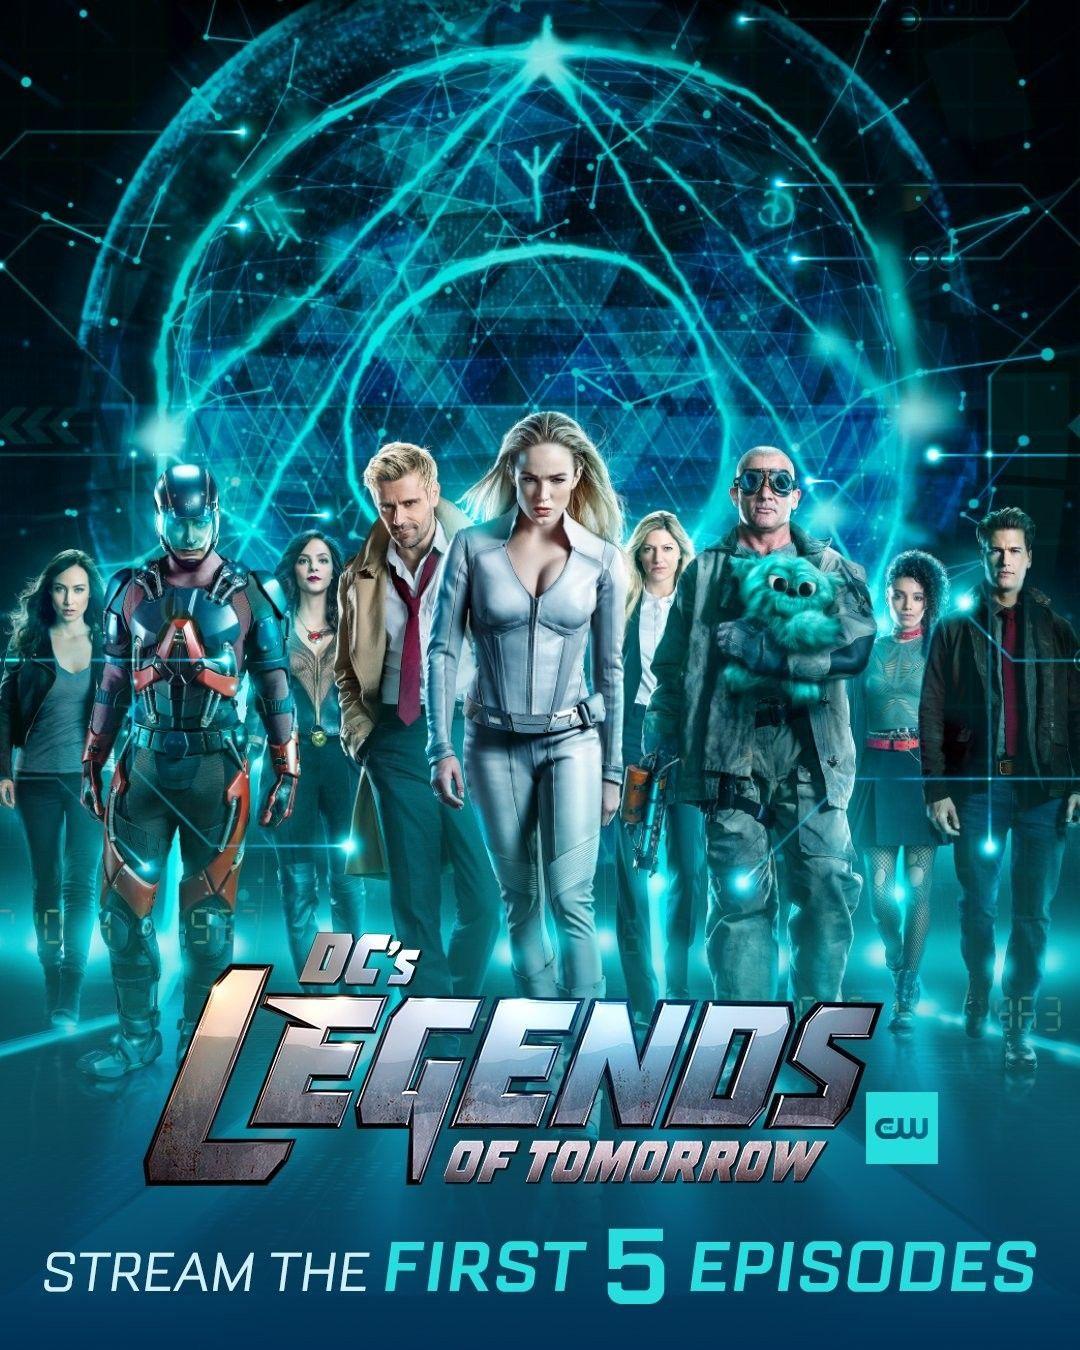 Dcs legends of tomorrow characters poster wallpapers